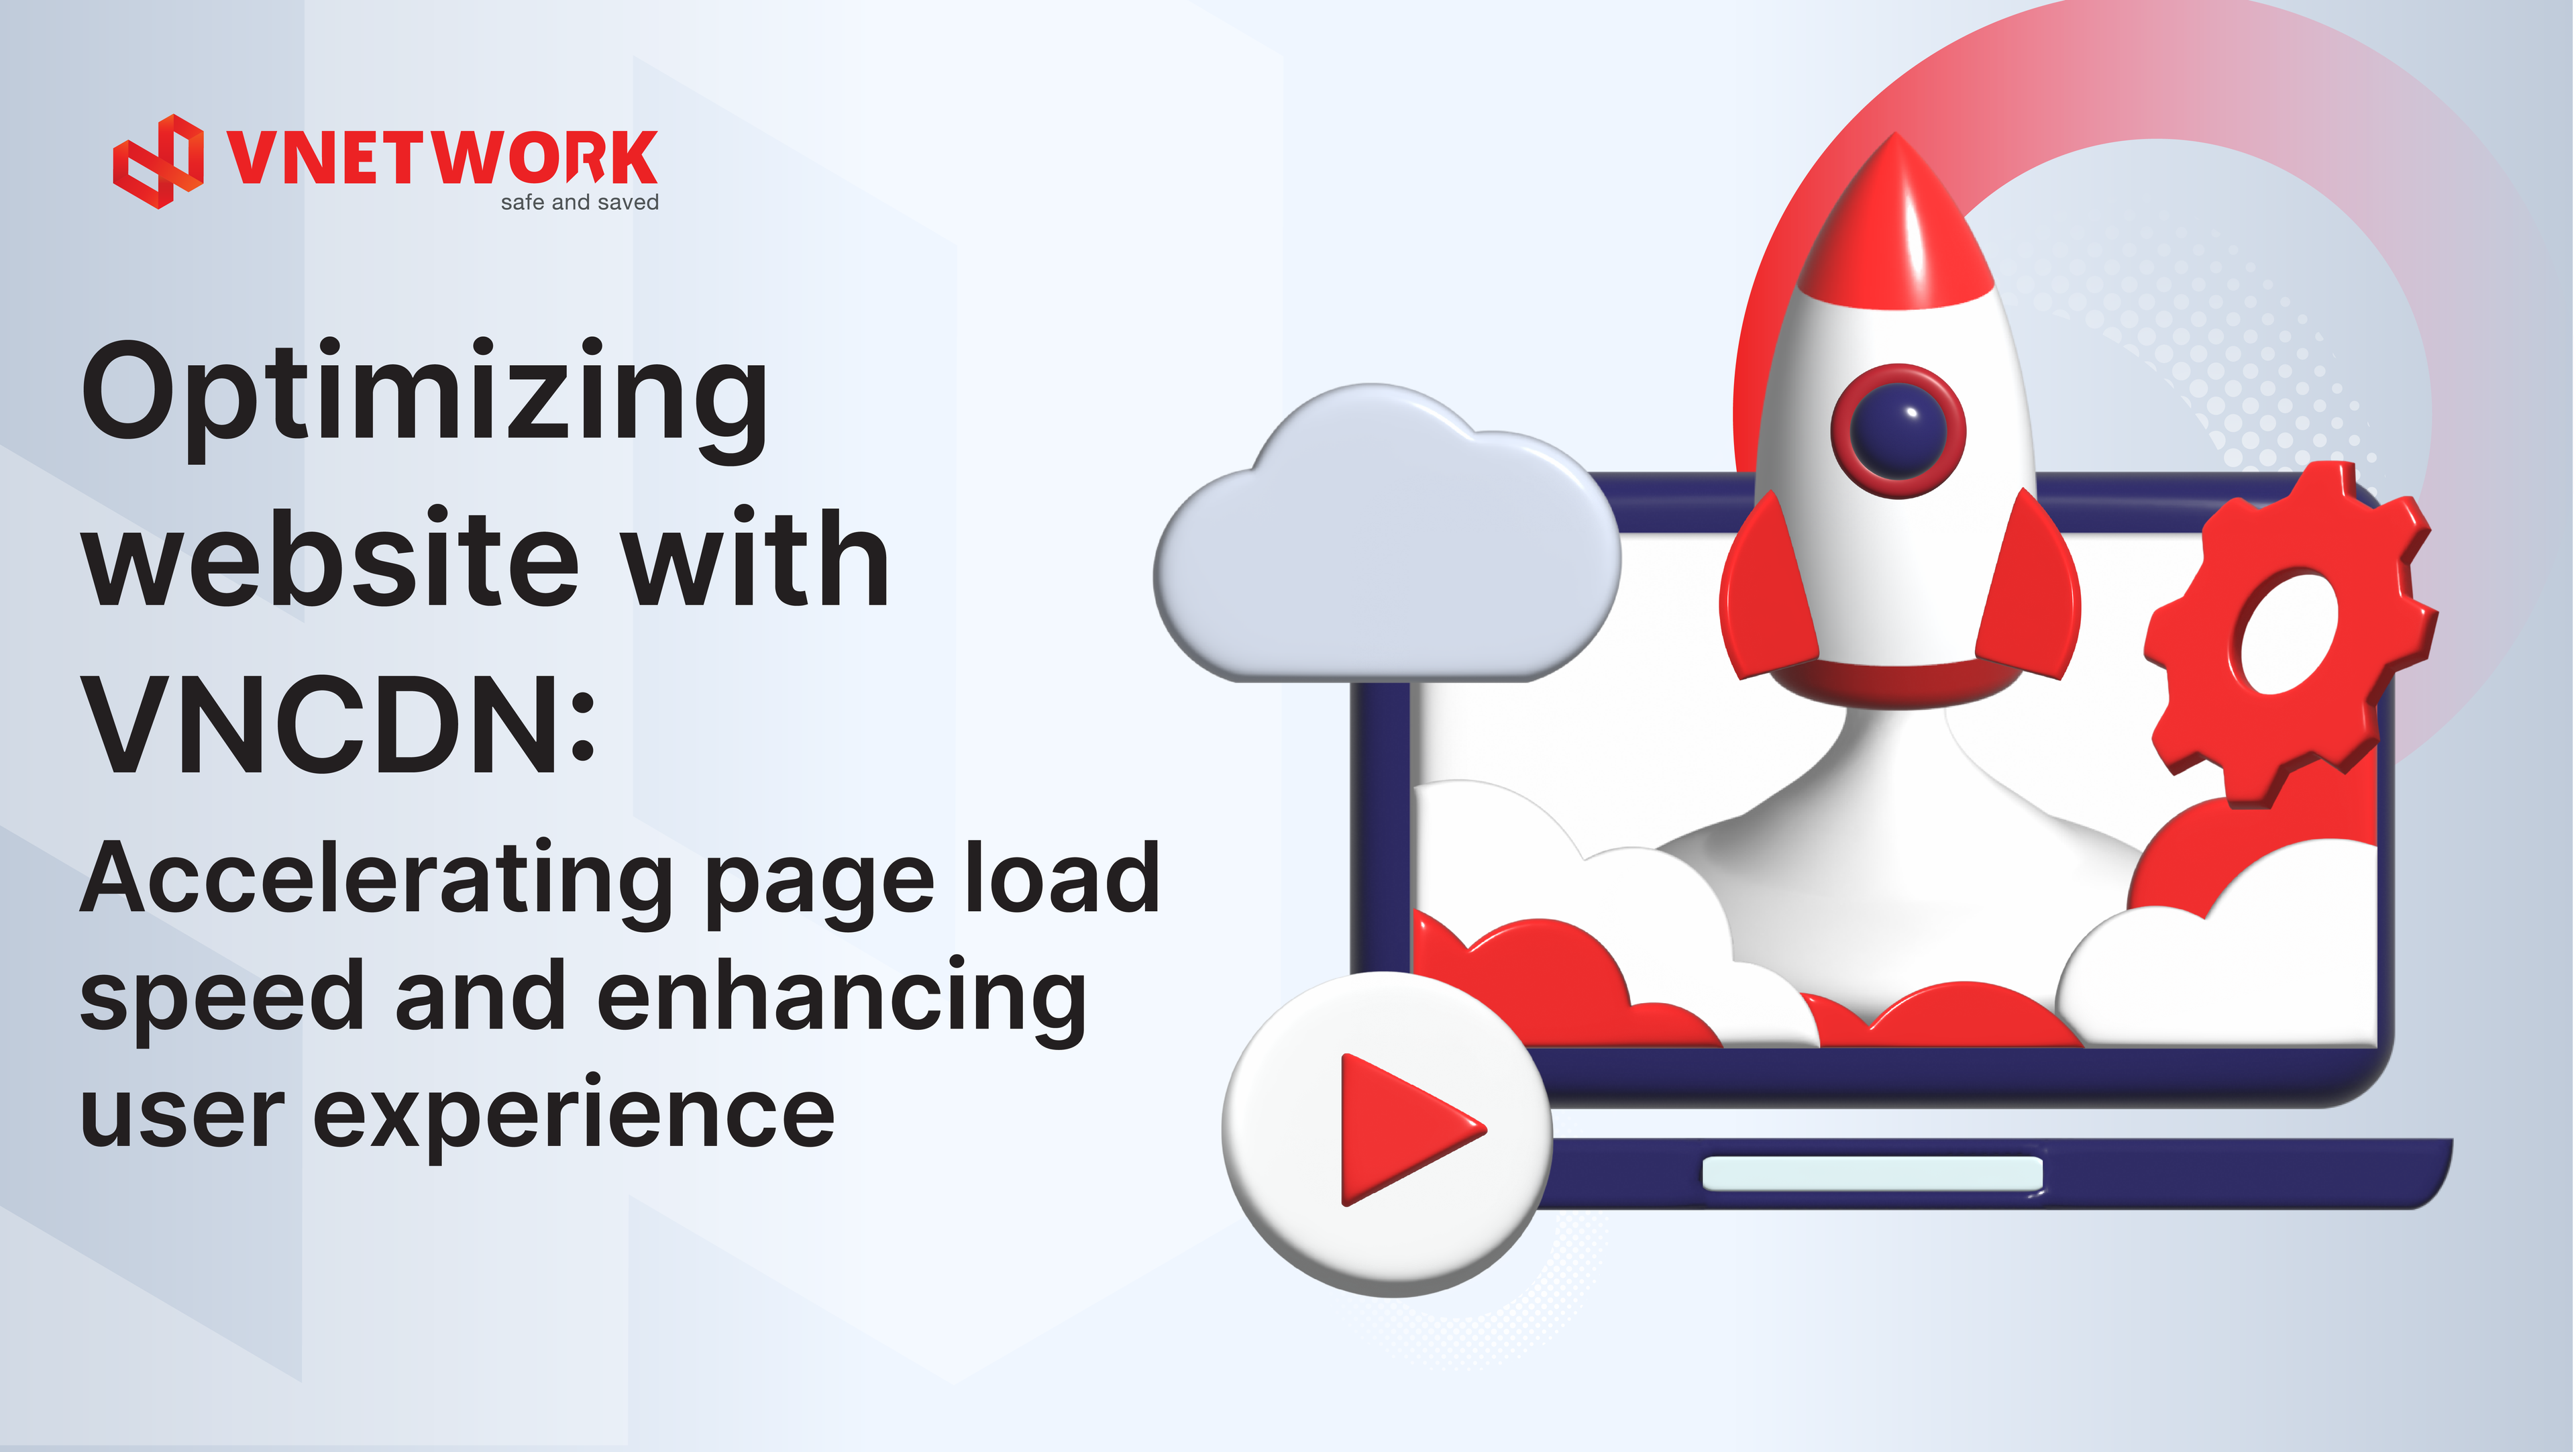 Optimizing website with VNCDN: Accelerating the page load speed and enhancing user experience